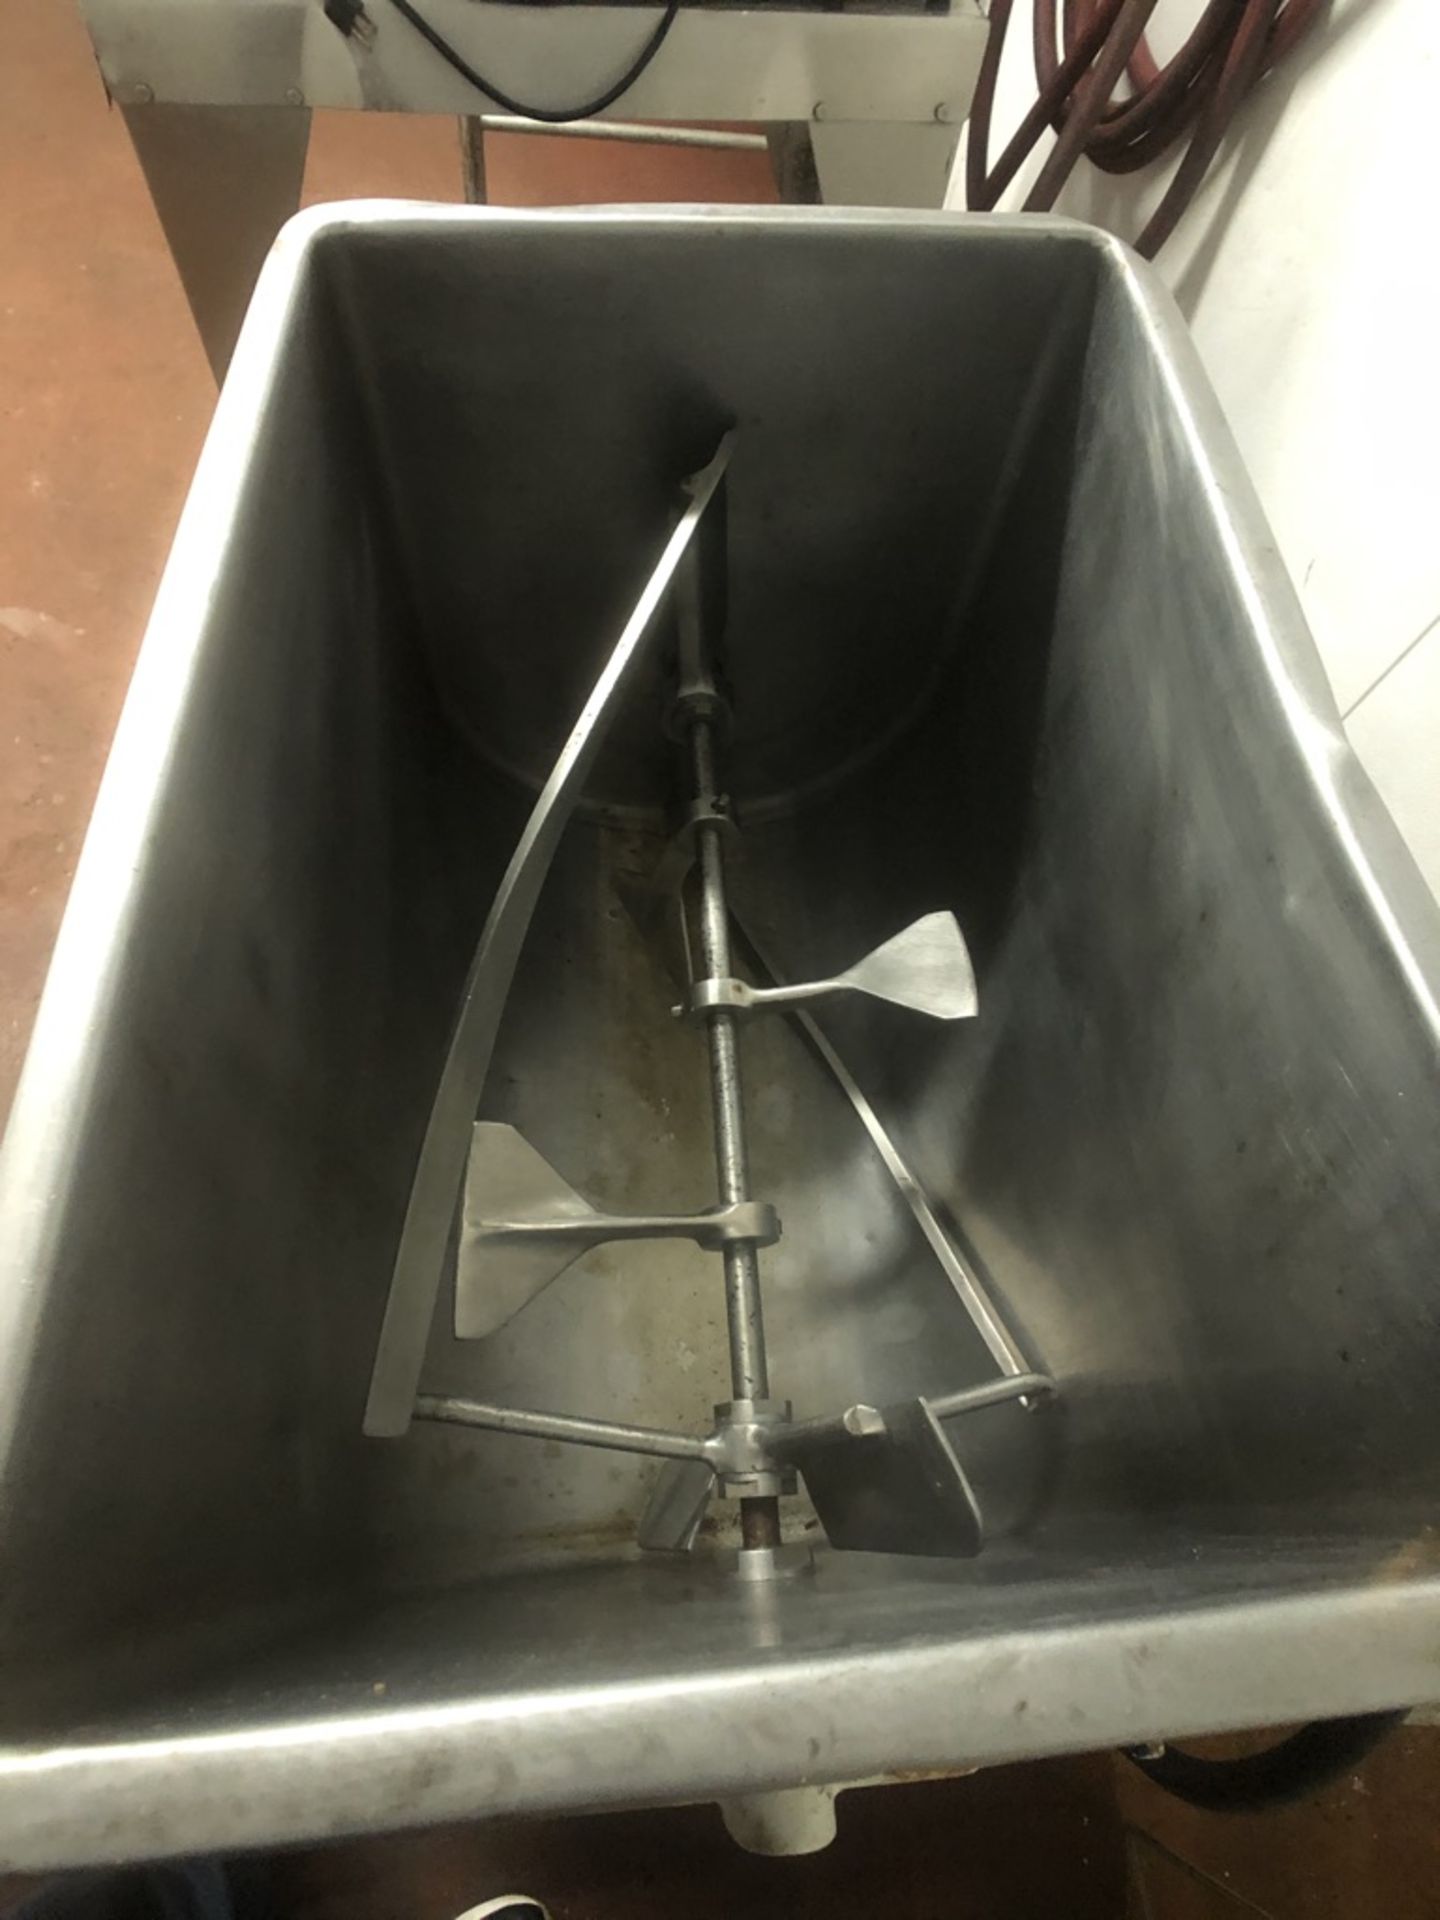 S/S Paddle Blender, Compartment Dims.: Aprox. 23-1/2" L x 16" W x 20" Deep, with Hydraulic Motor, - Image 3 of 14